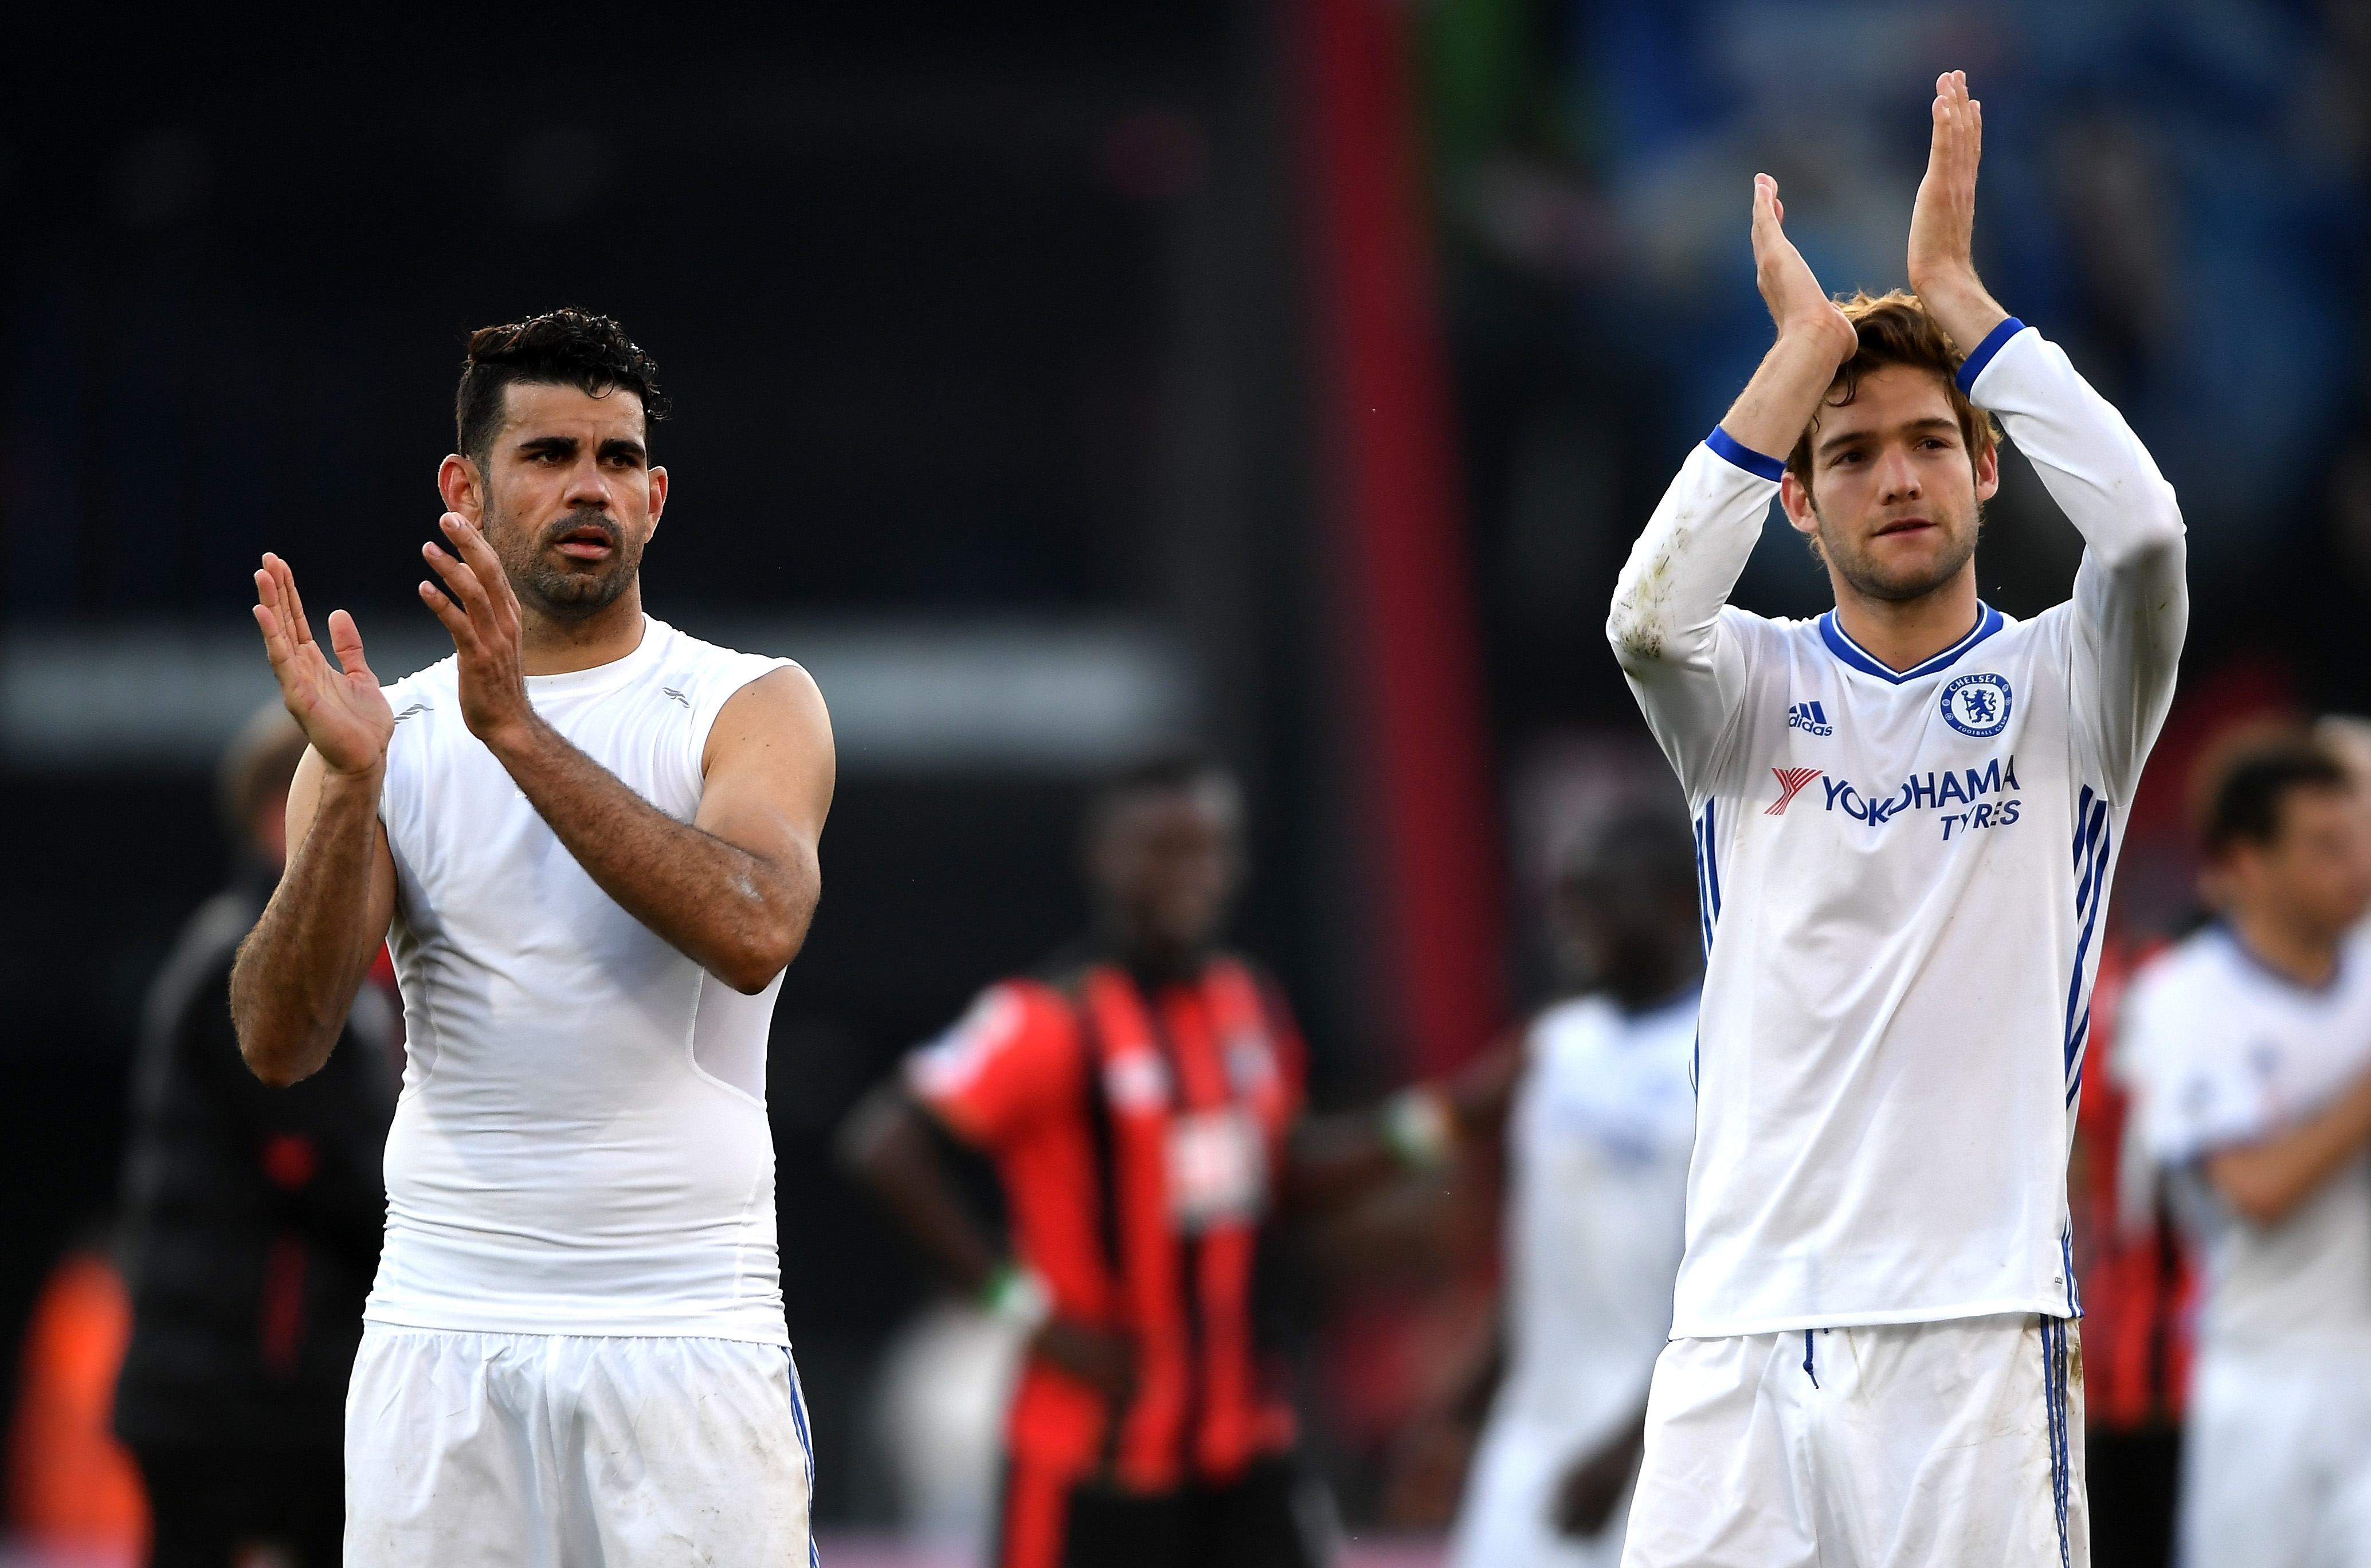 BOURNEMOUTH, ENGLAND - APRIL 08: Diego Costa of Chelsea (L) and Marcos Alonso of Chelsea (R) show appreciation to the fans after the Premier League match between AFC Bournemouth and Chelsea at Vitality Stadium on April 8, 2017 in Bournemouth, England.  (Photo by Mike Hewitt/Getty Images)